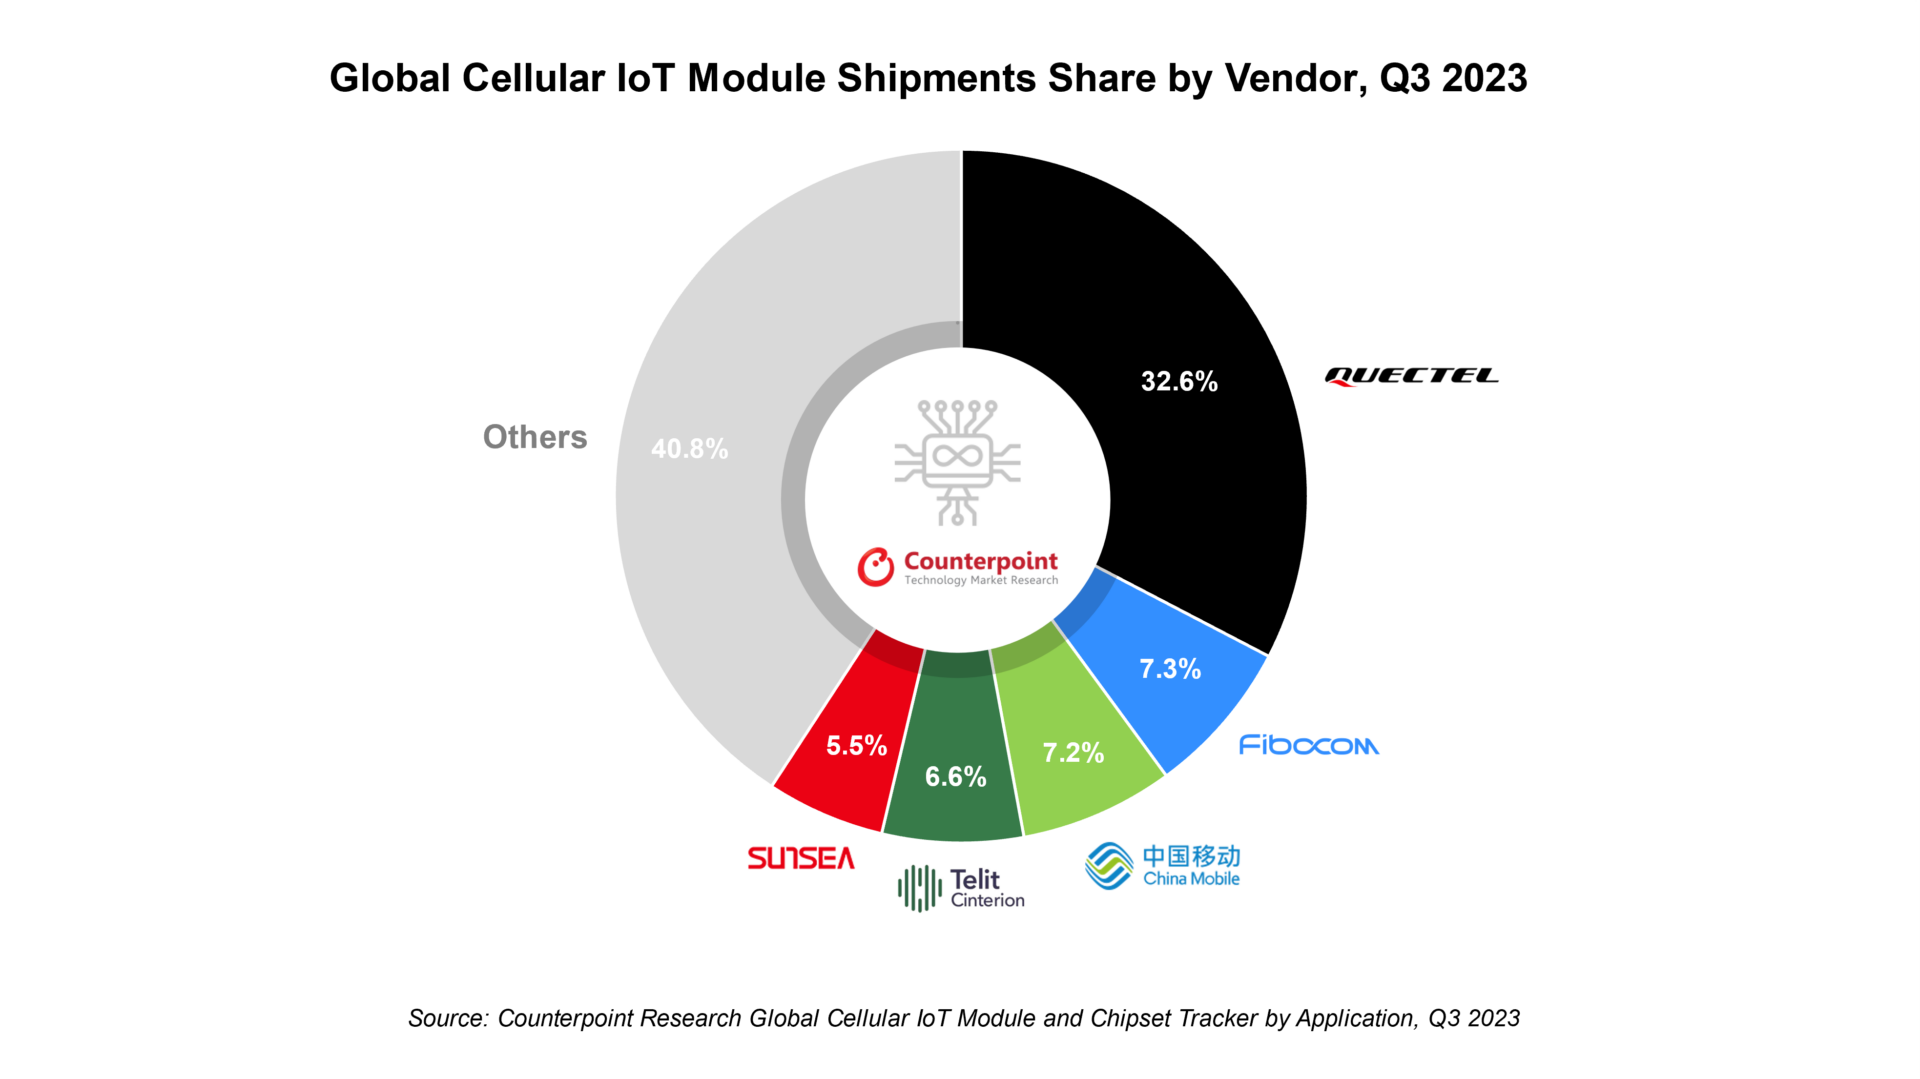 Global Cellular IoT Module Shipments Share by Vendor Q3 2023